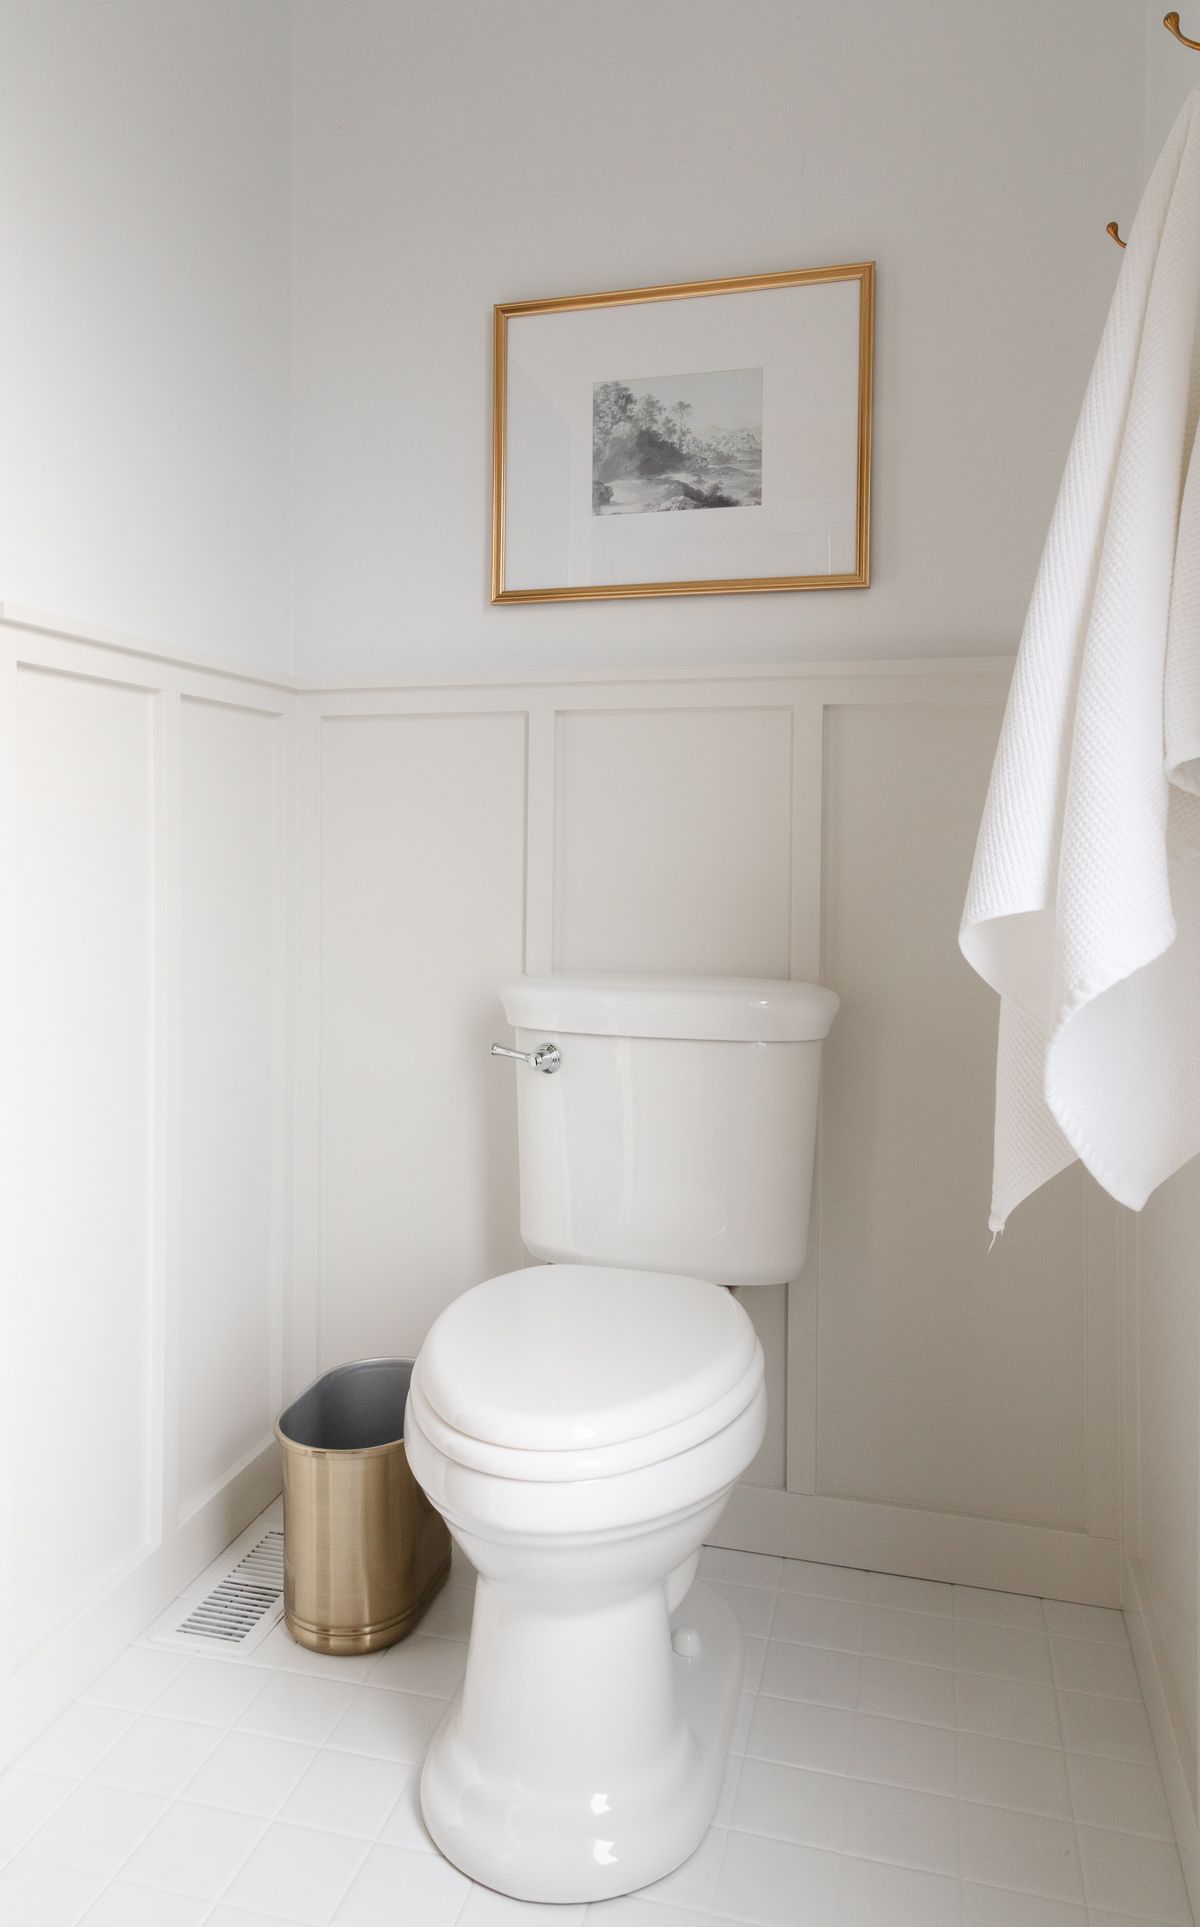 A white and gray bathroom with wainscotting around the space and Benjamin Moore Decorator's White paint above.